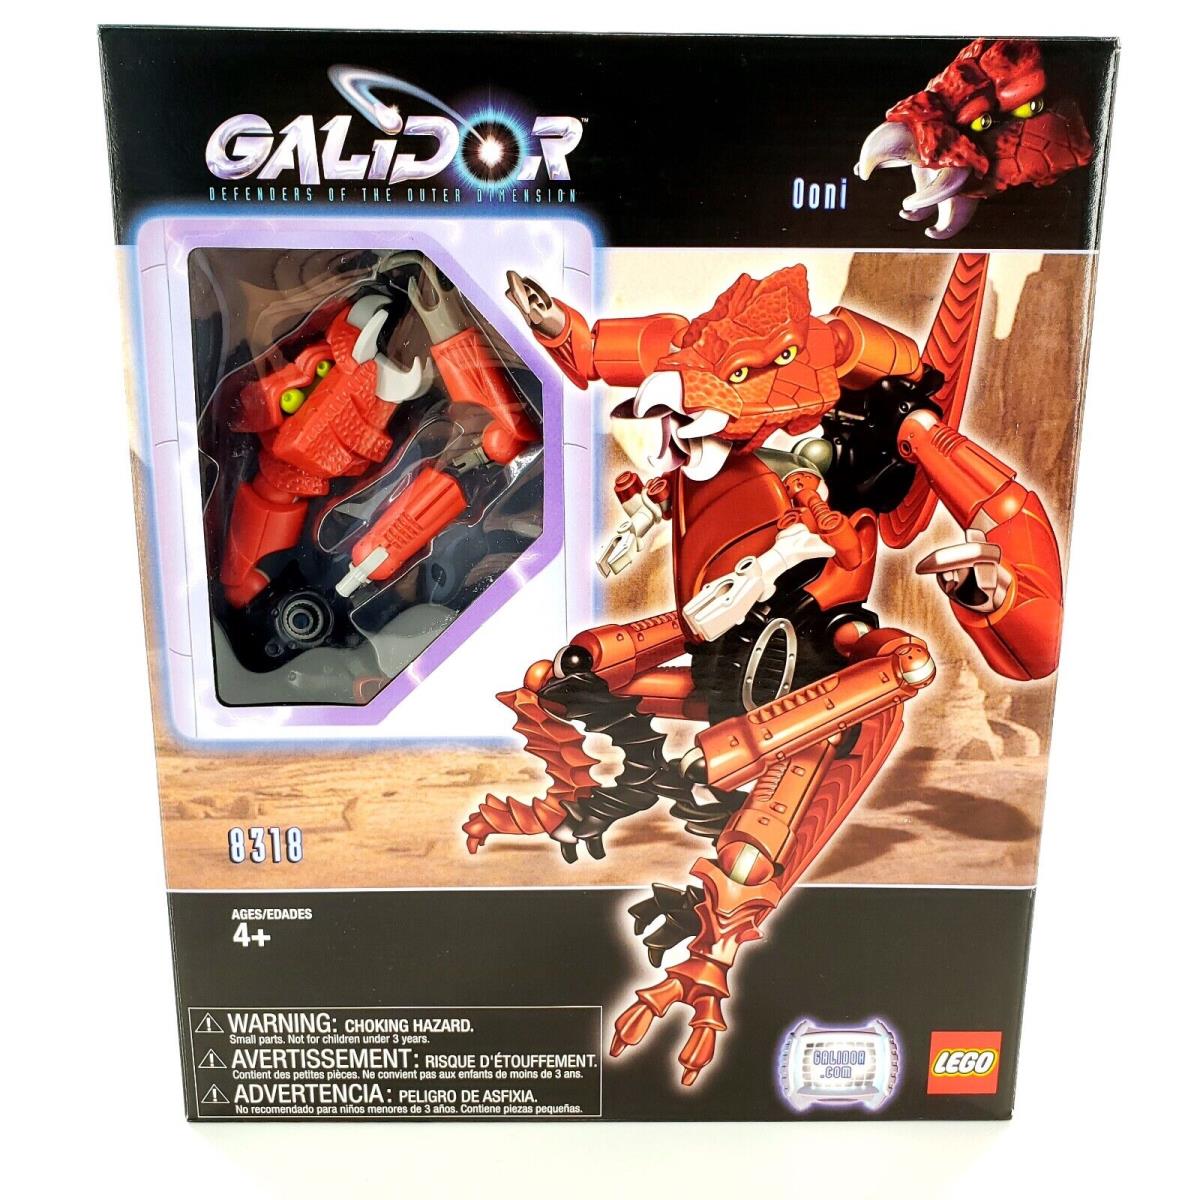 Lego Galidor: Ooni 8318 Defenders of The Outer Dimension